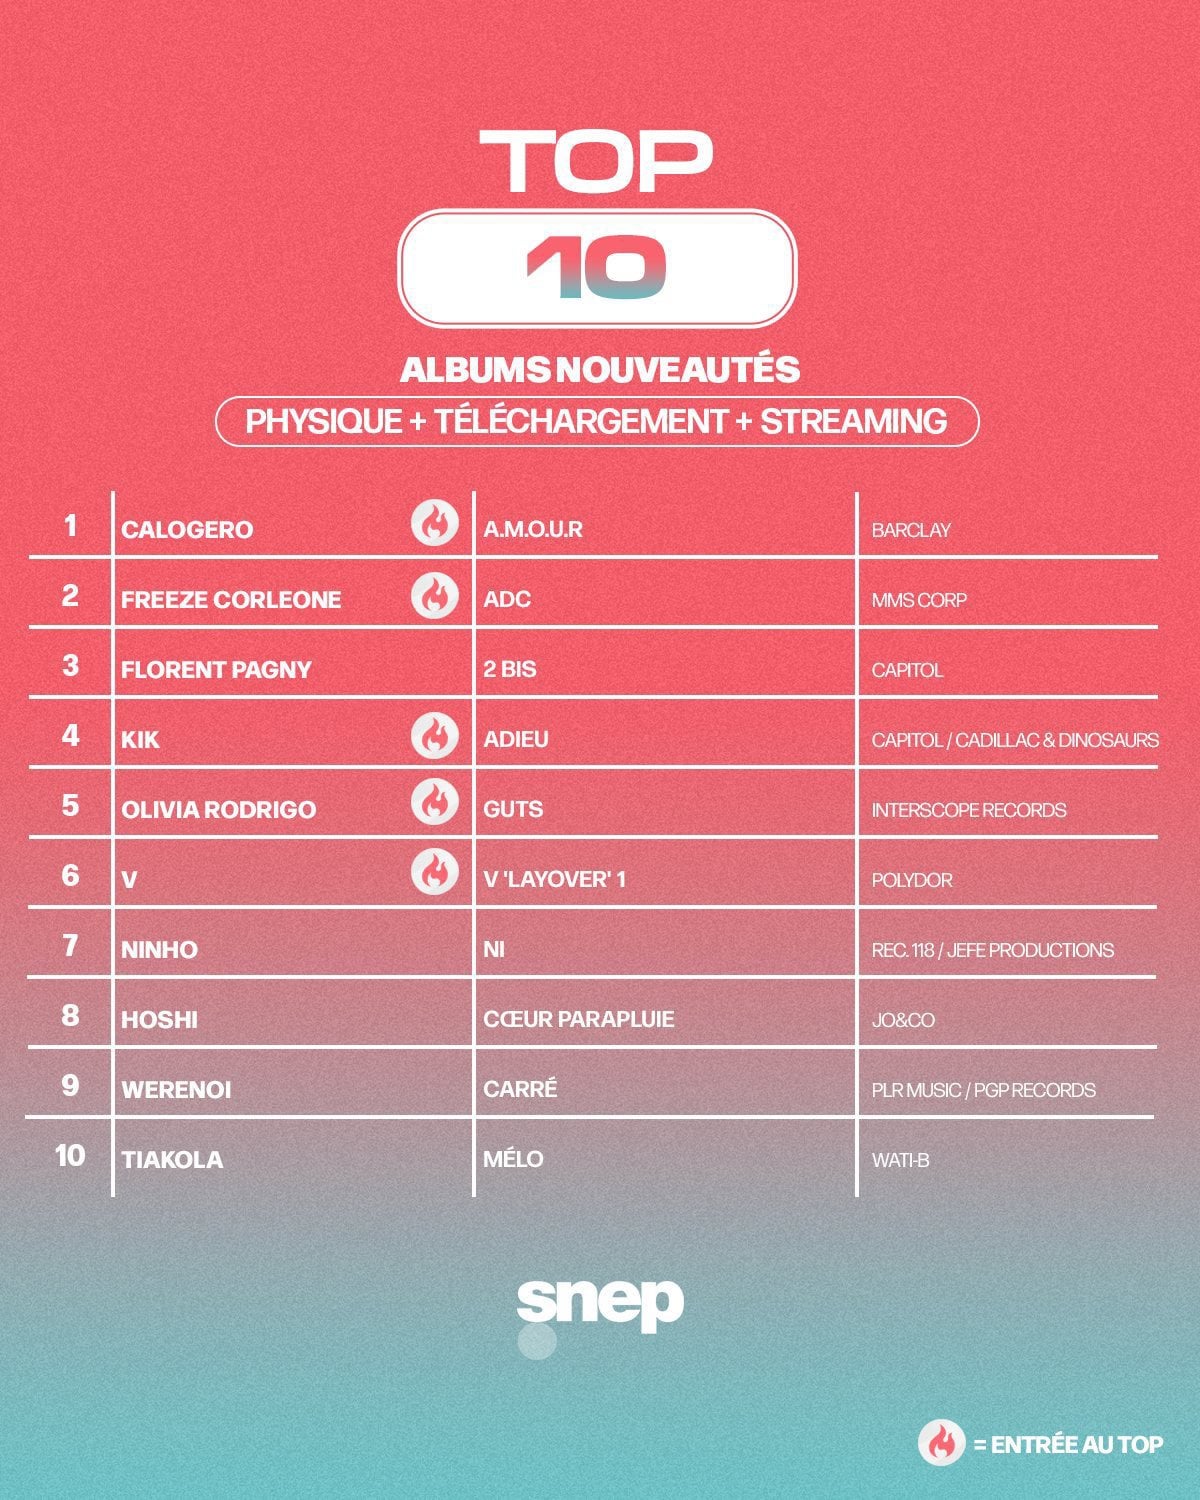 230915 V’s “Layover” debuts in the Top 10 of the official albums chart in France (SNEP) at #6!